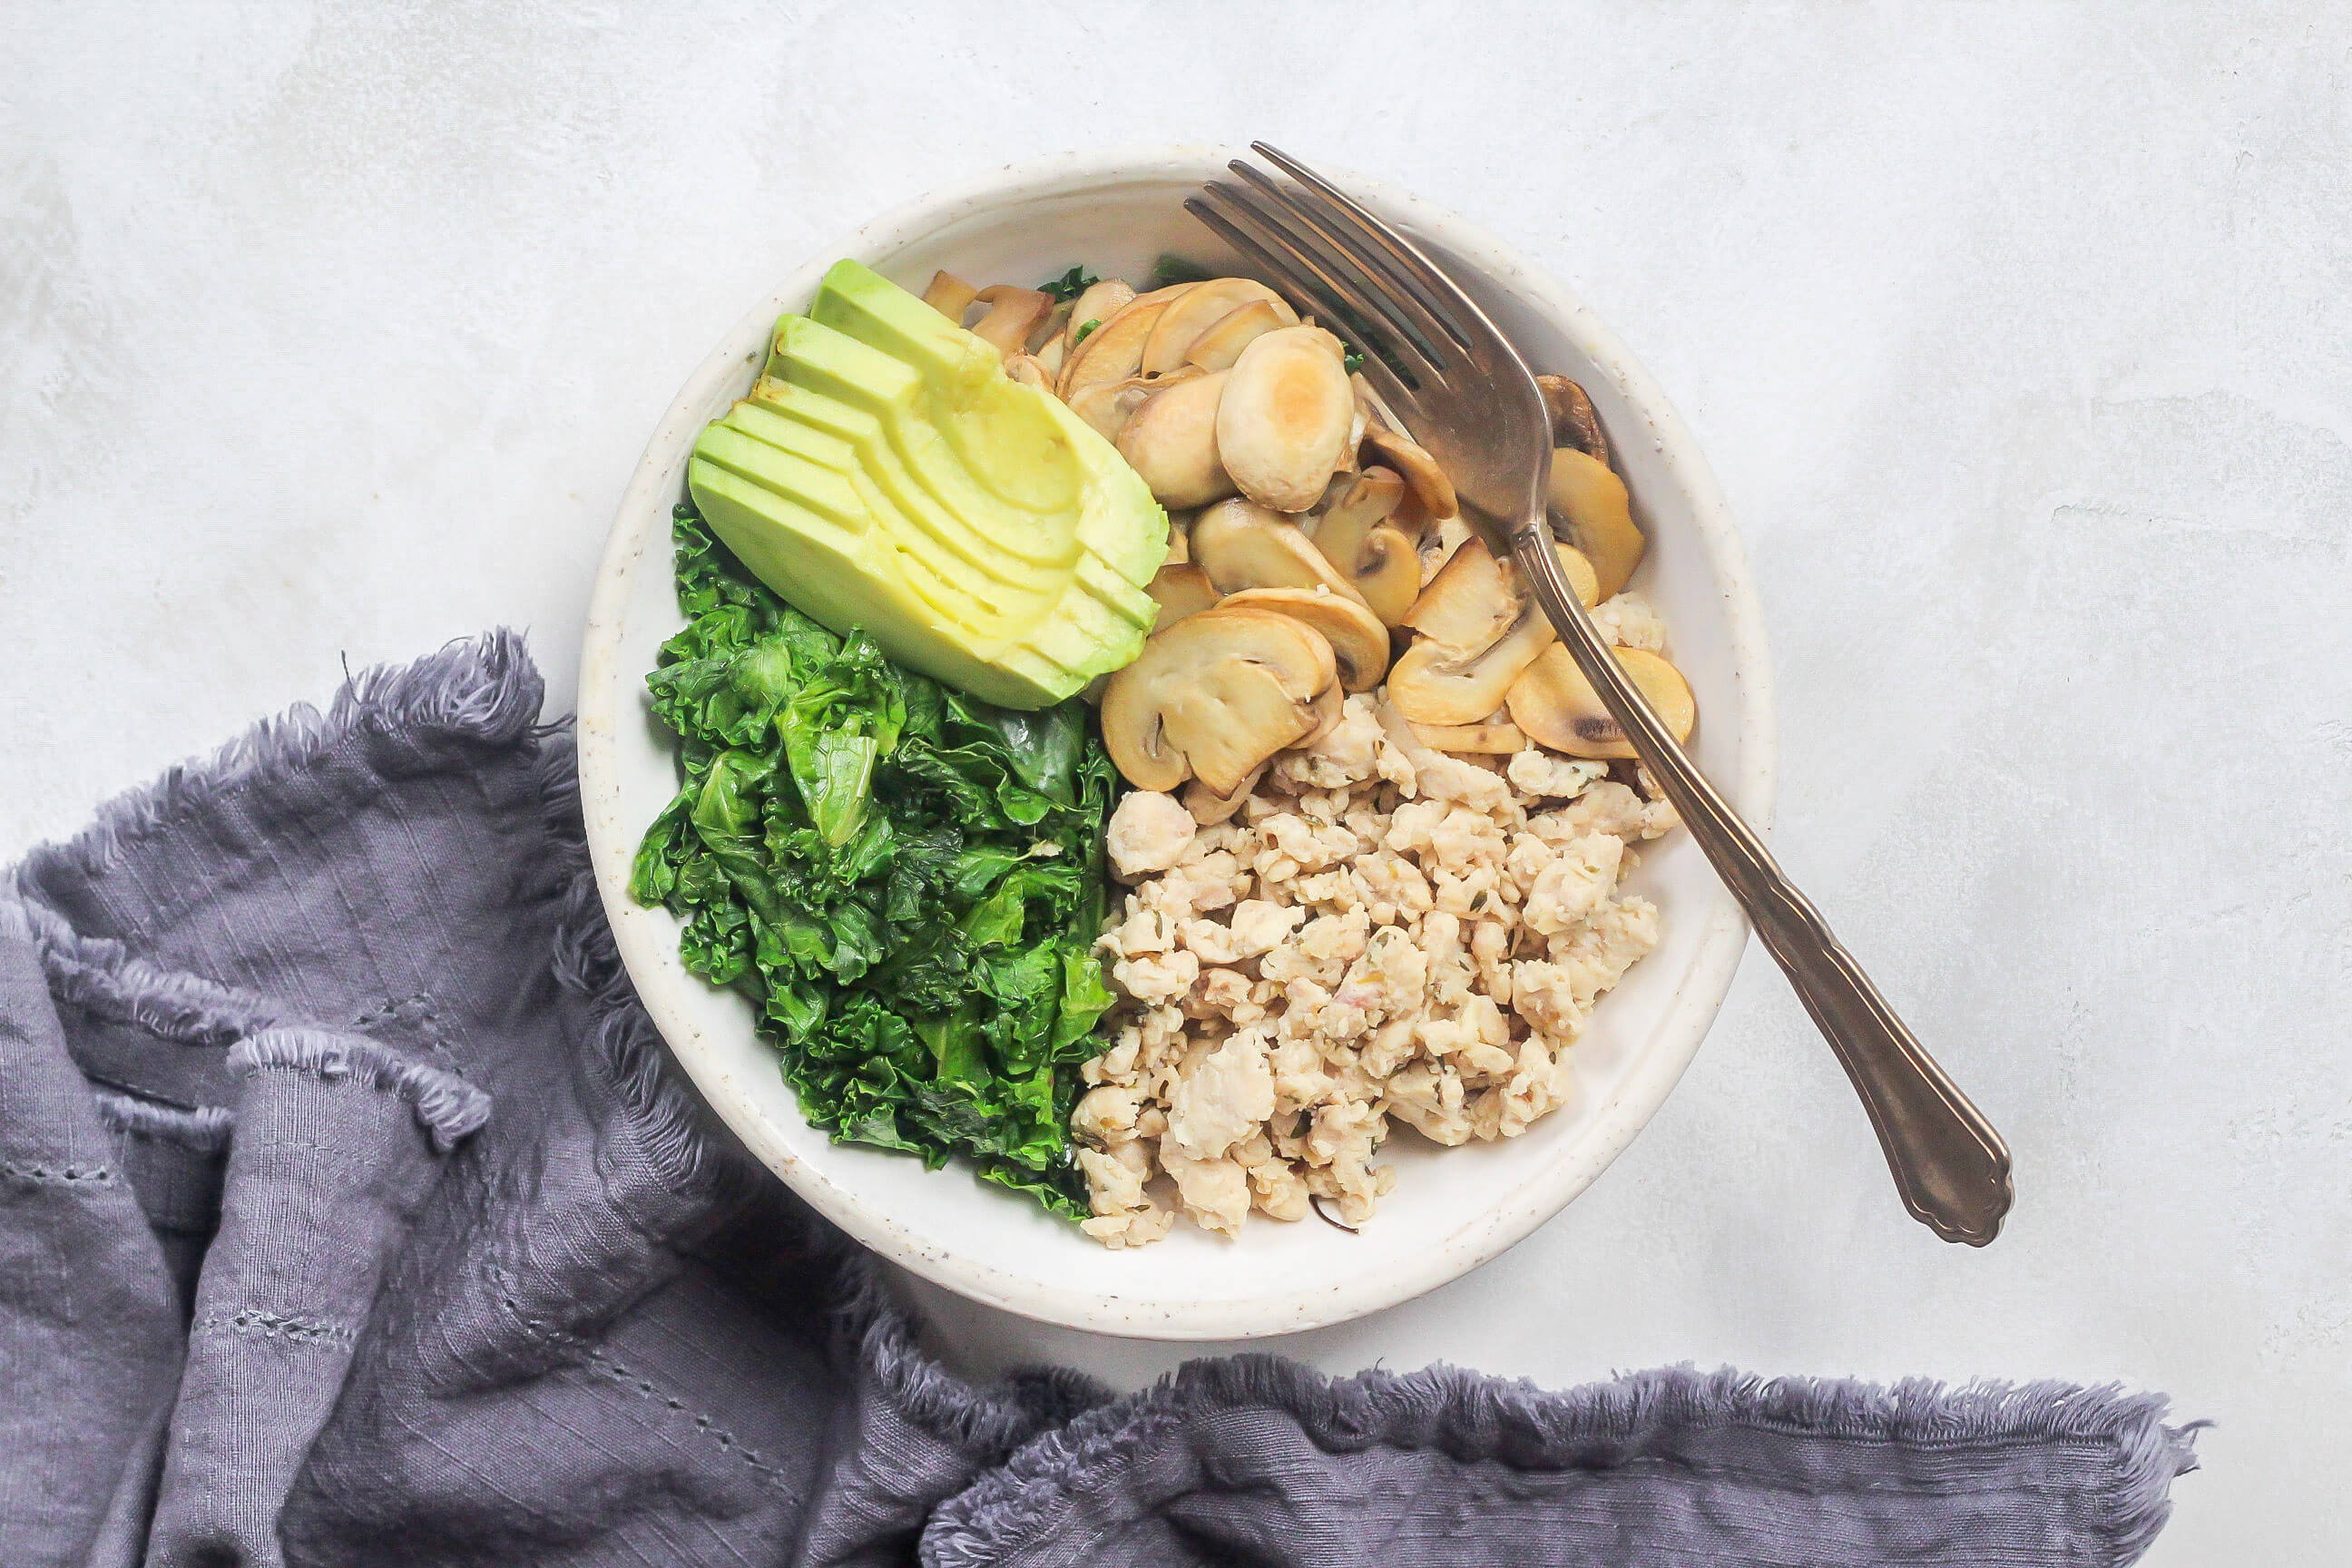 20 Specific Carbohydrate Diet Meals to Help Clients With Inflammatory Bowel Disease: Chicken, Kale & Avocado Bowl